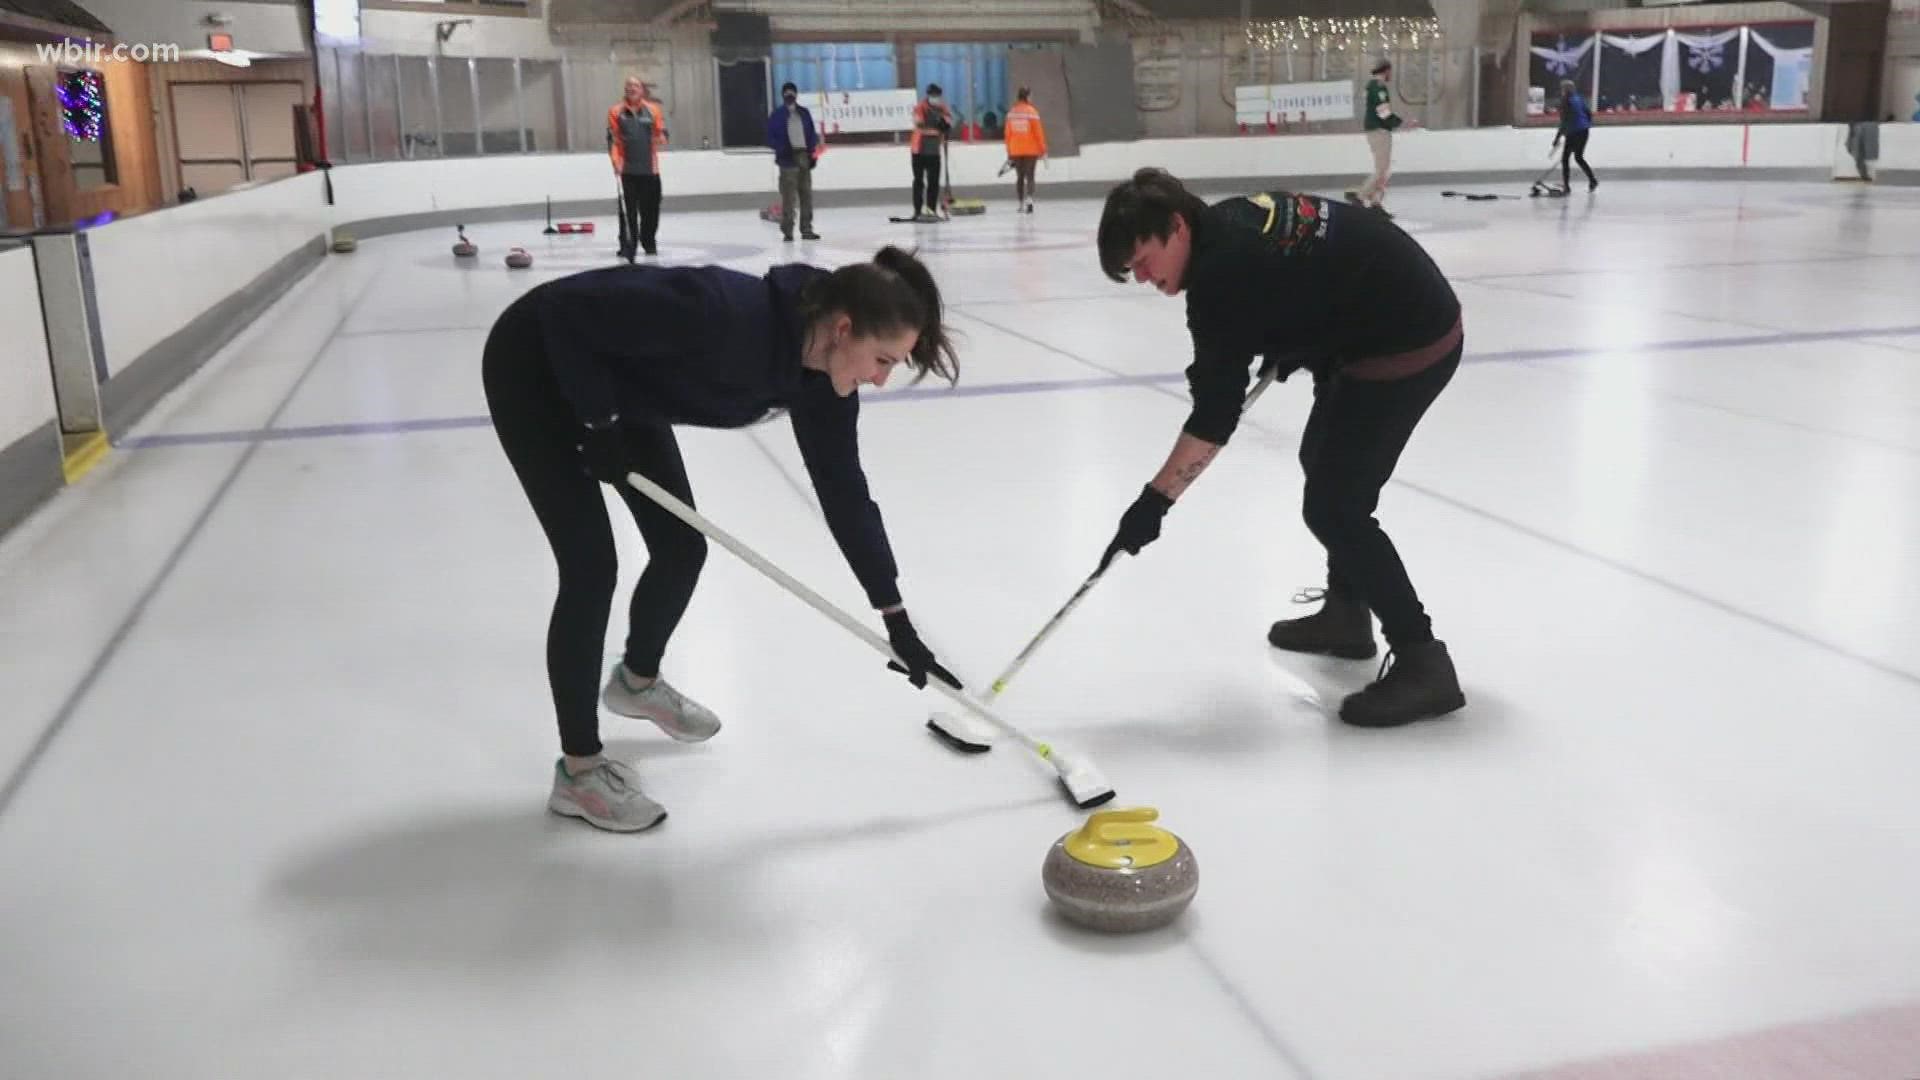 Whats curling? Learn to play the Olympic favorite in Knoxville wbir